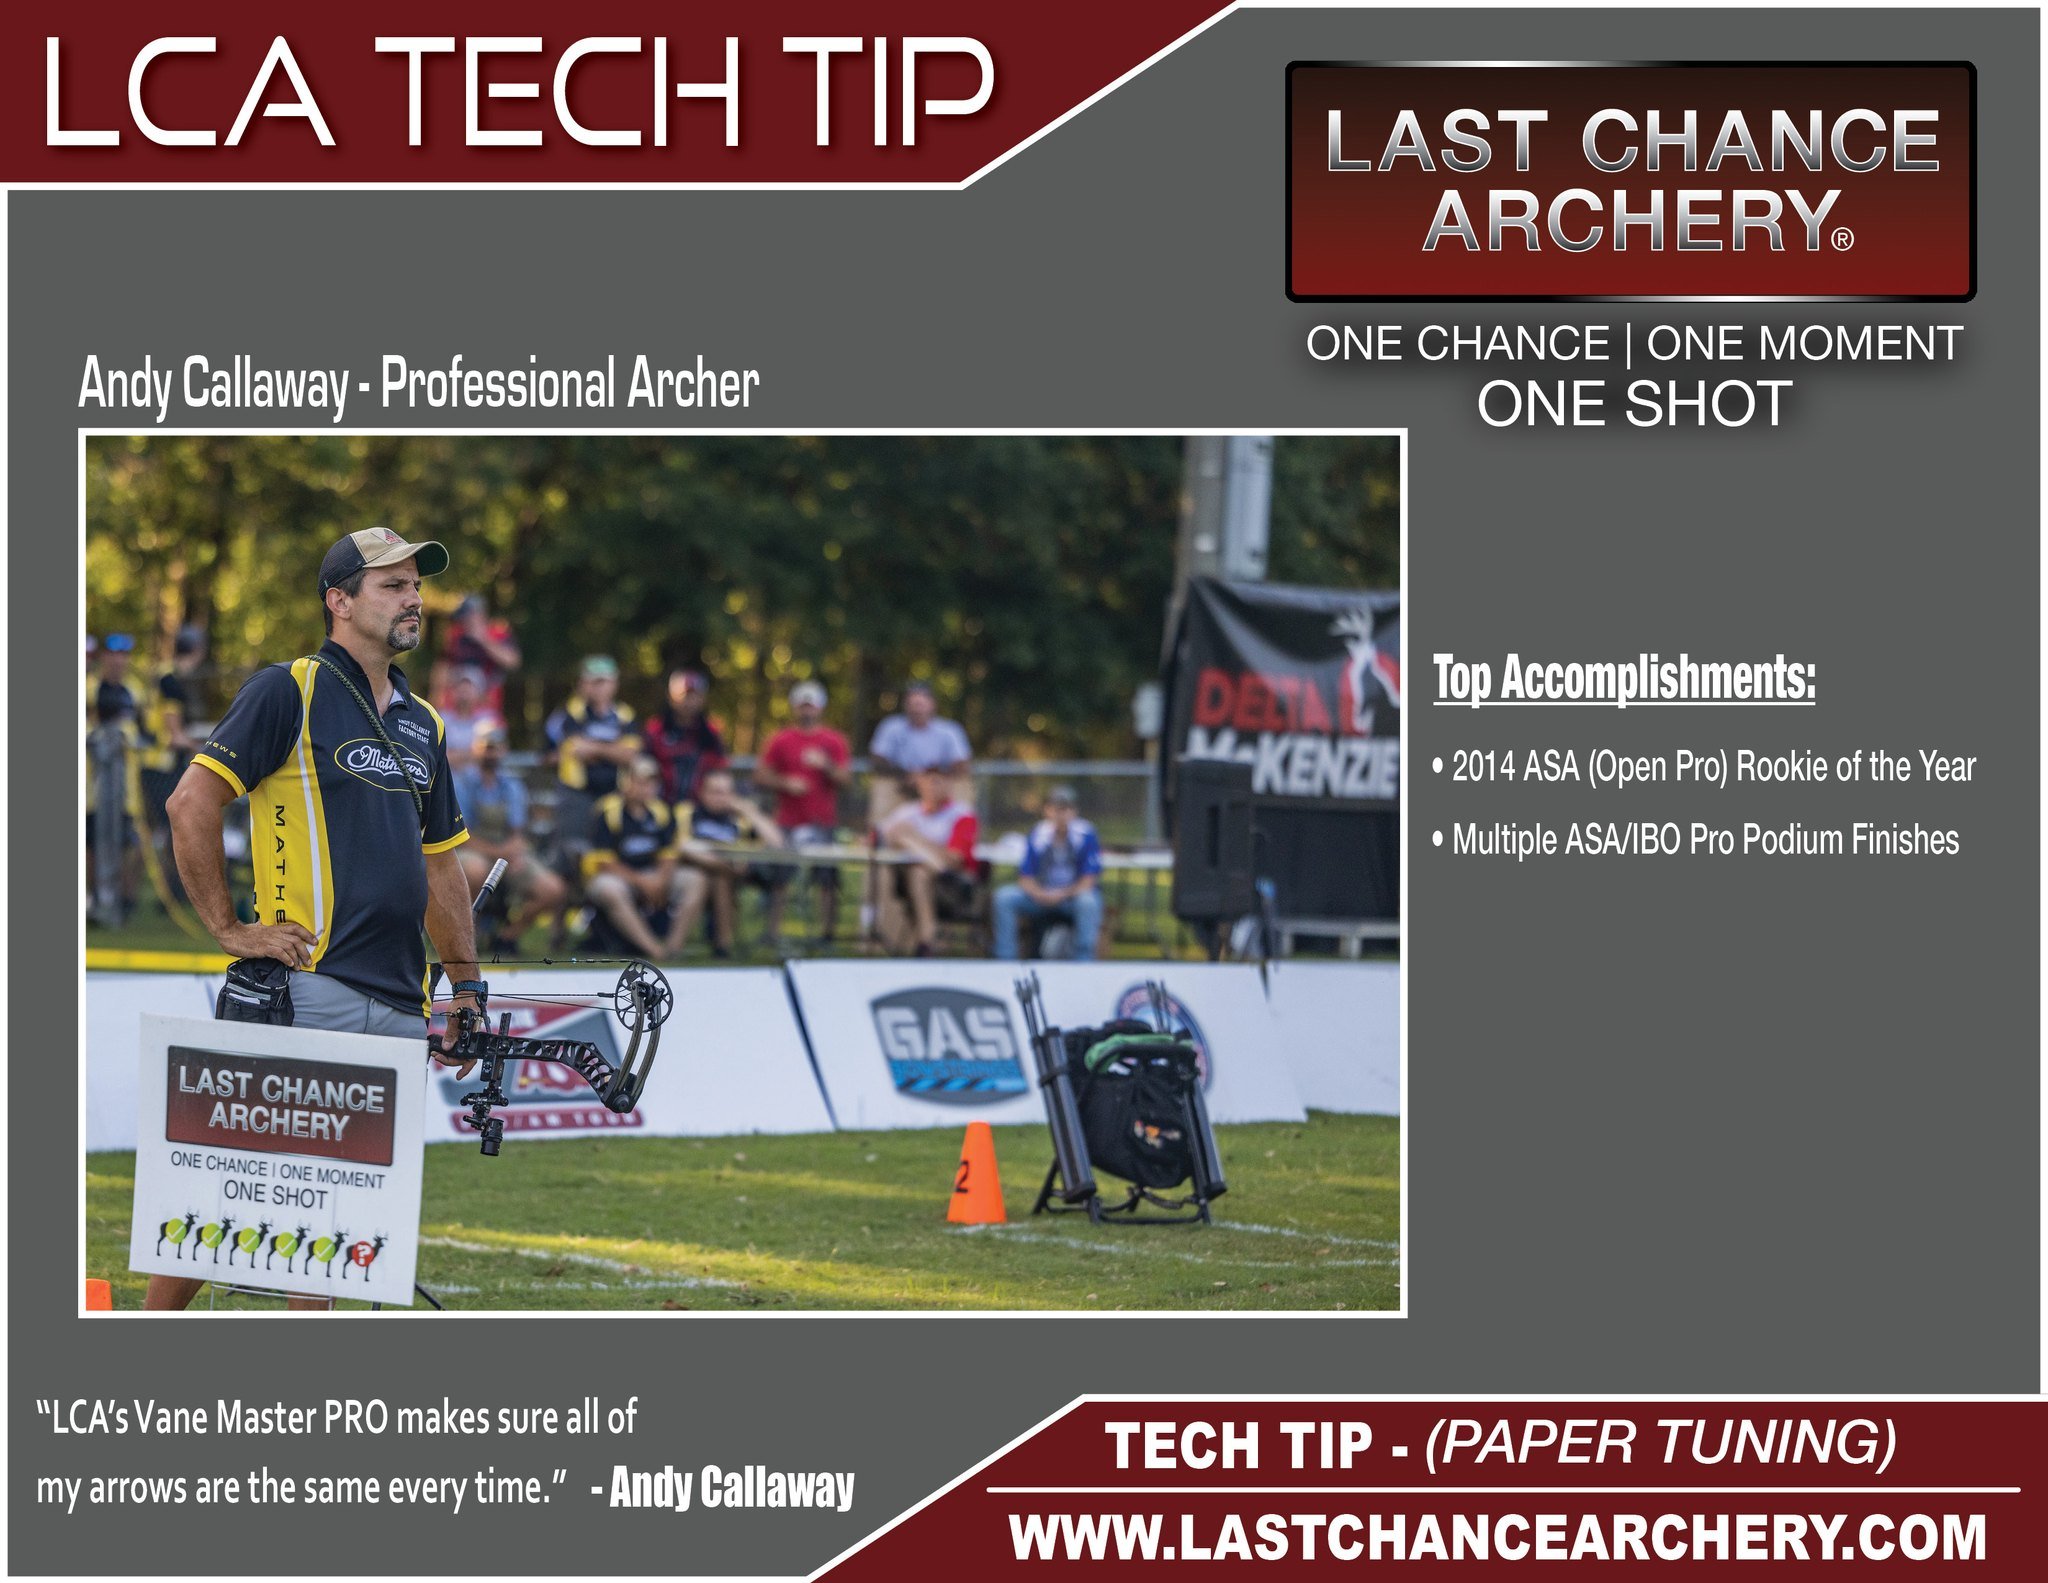 A new LCA Tech Tip is LIVE now! 

LINK: https://lastchancearchery.com/blog-links

You can copy and paste the above link into any web browser, or simply visit the LCA website. From the main header, select &ldquo;Tech Tips.&rdquo; This tip, packed with